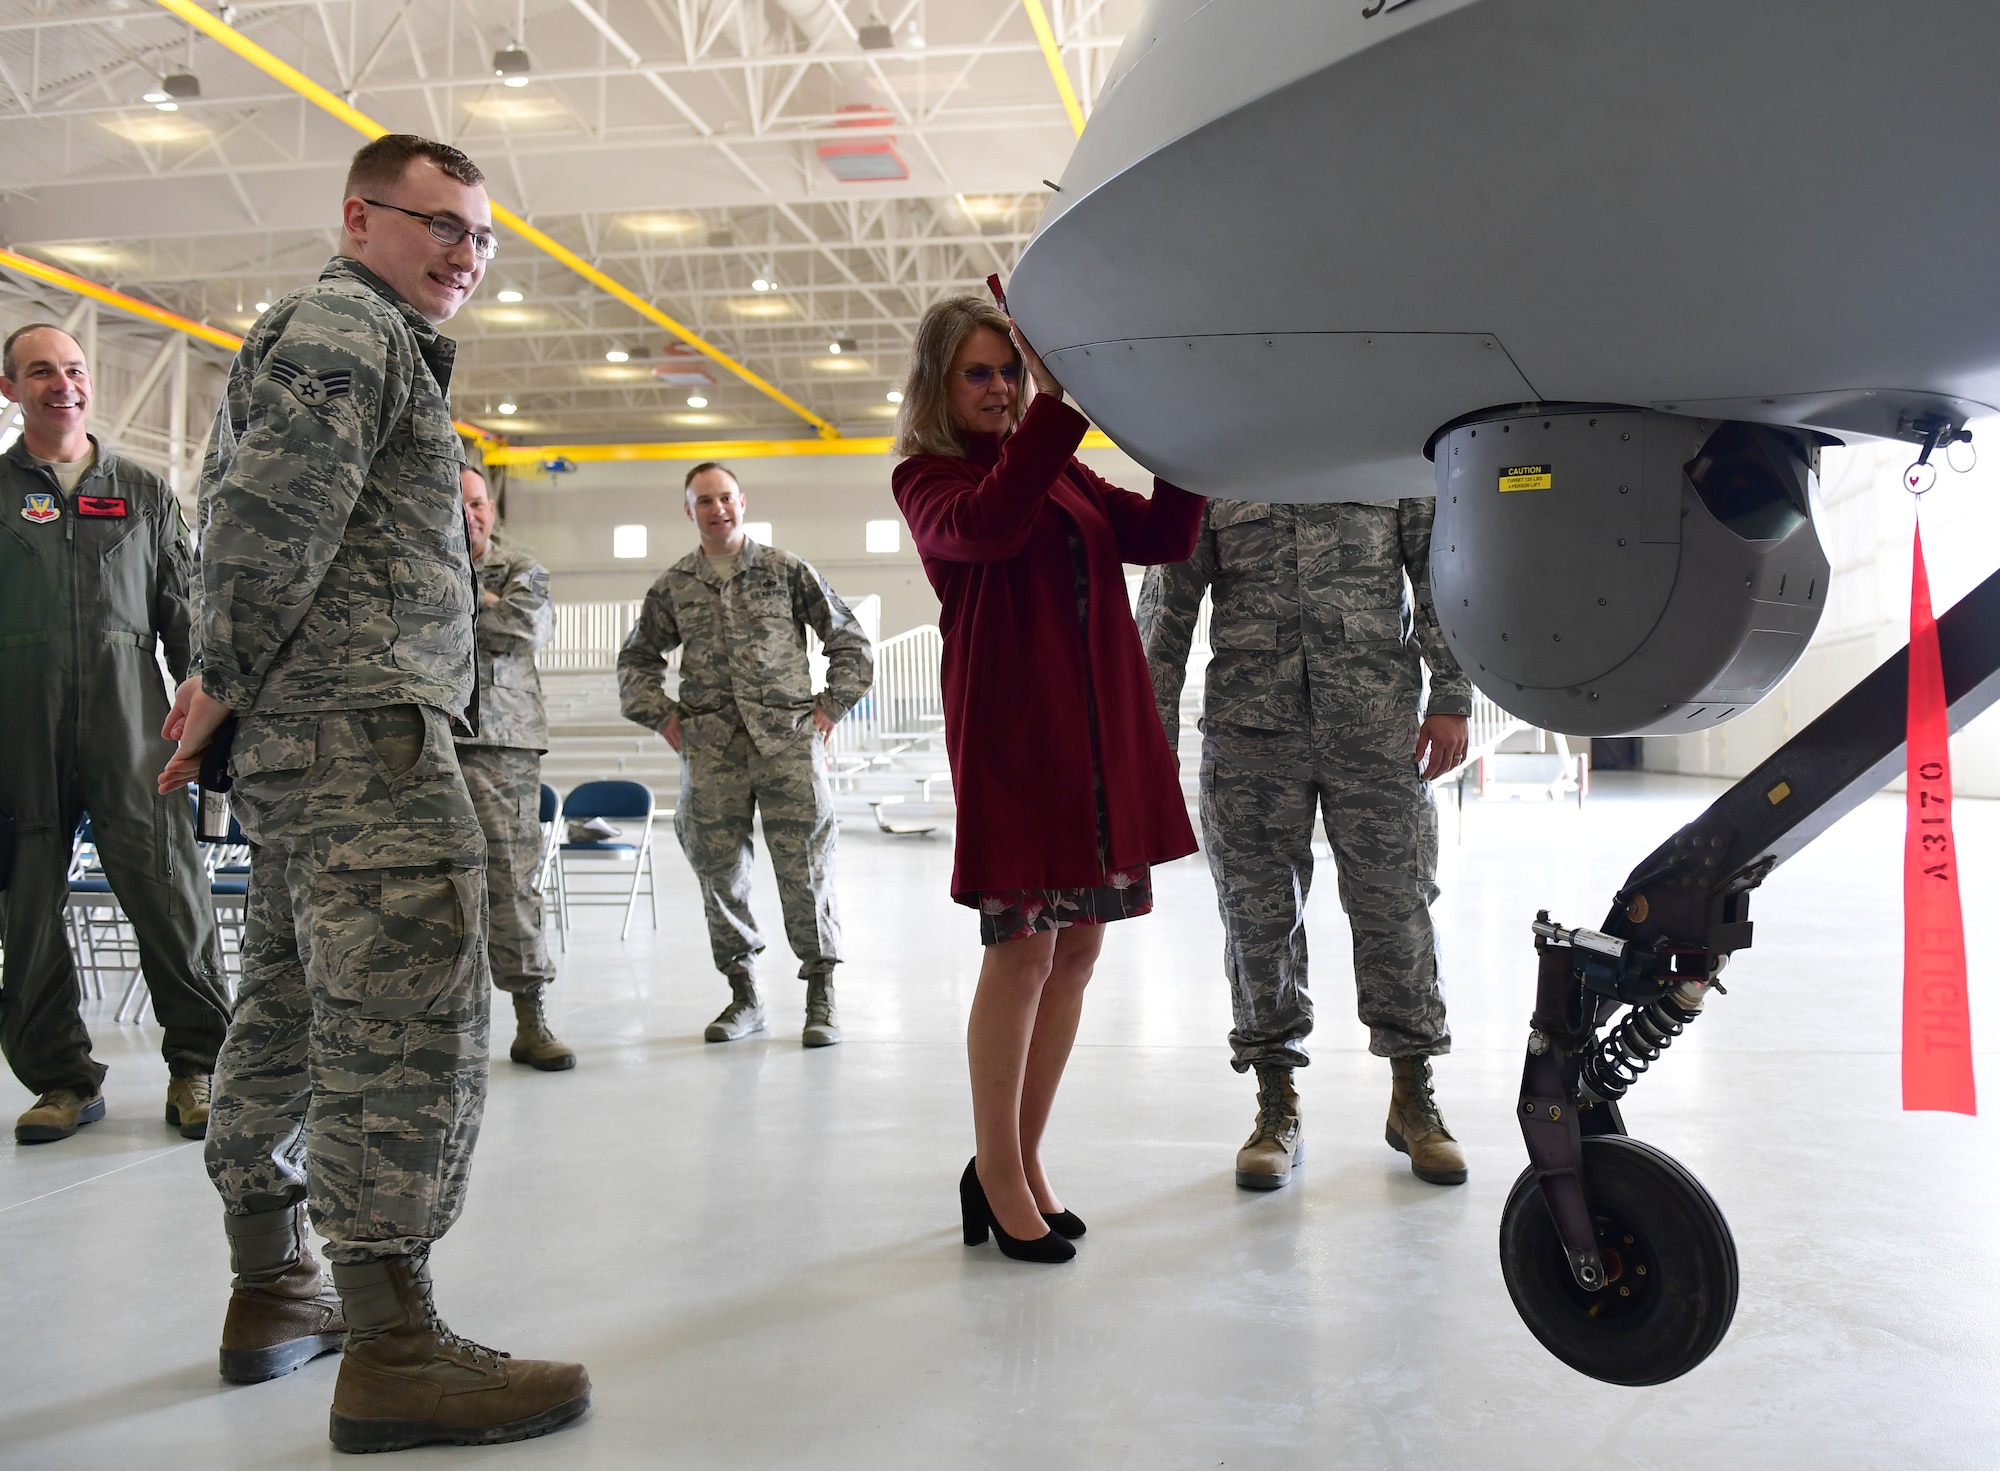 Ms. Jonna Doolittle Hoppes, executive director of the Doolittle Foundation and granddaughter of Gen. James “Jimmy” Doolittle, lifts the nose of an MQ-1 Predator off the ground Jan. 18, 2018, at Creech Air Force Base, Nev. Ms. Doolittle Hoppes toured the base with retired Lt. Gen. Christopher Miller, president of the Air Force Historical Foundation, before presenting the General James H. “Jimmy” Doolittle award to the 432nd Wing/432nd Air Expeditionary Wing. (U.S. Air Force photo/Senior Airman Christian Clausen)